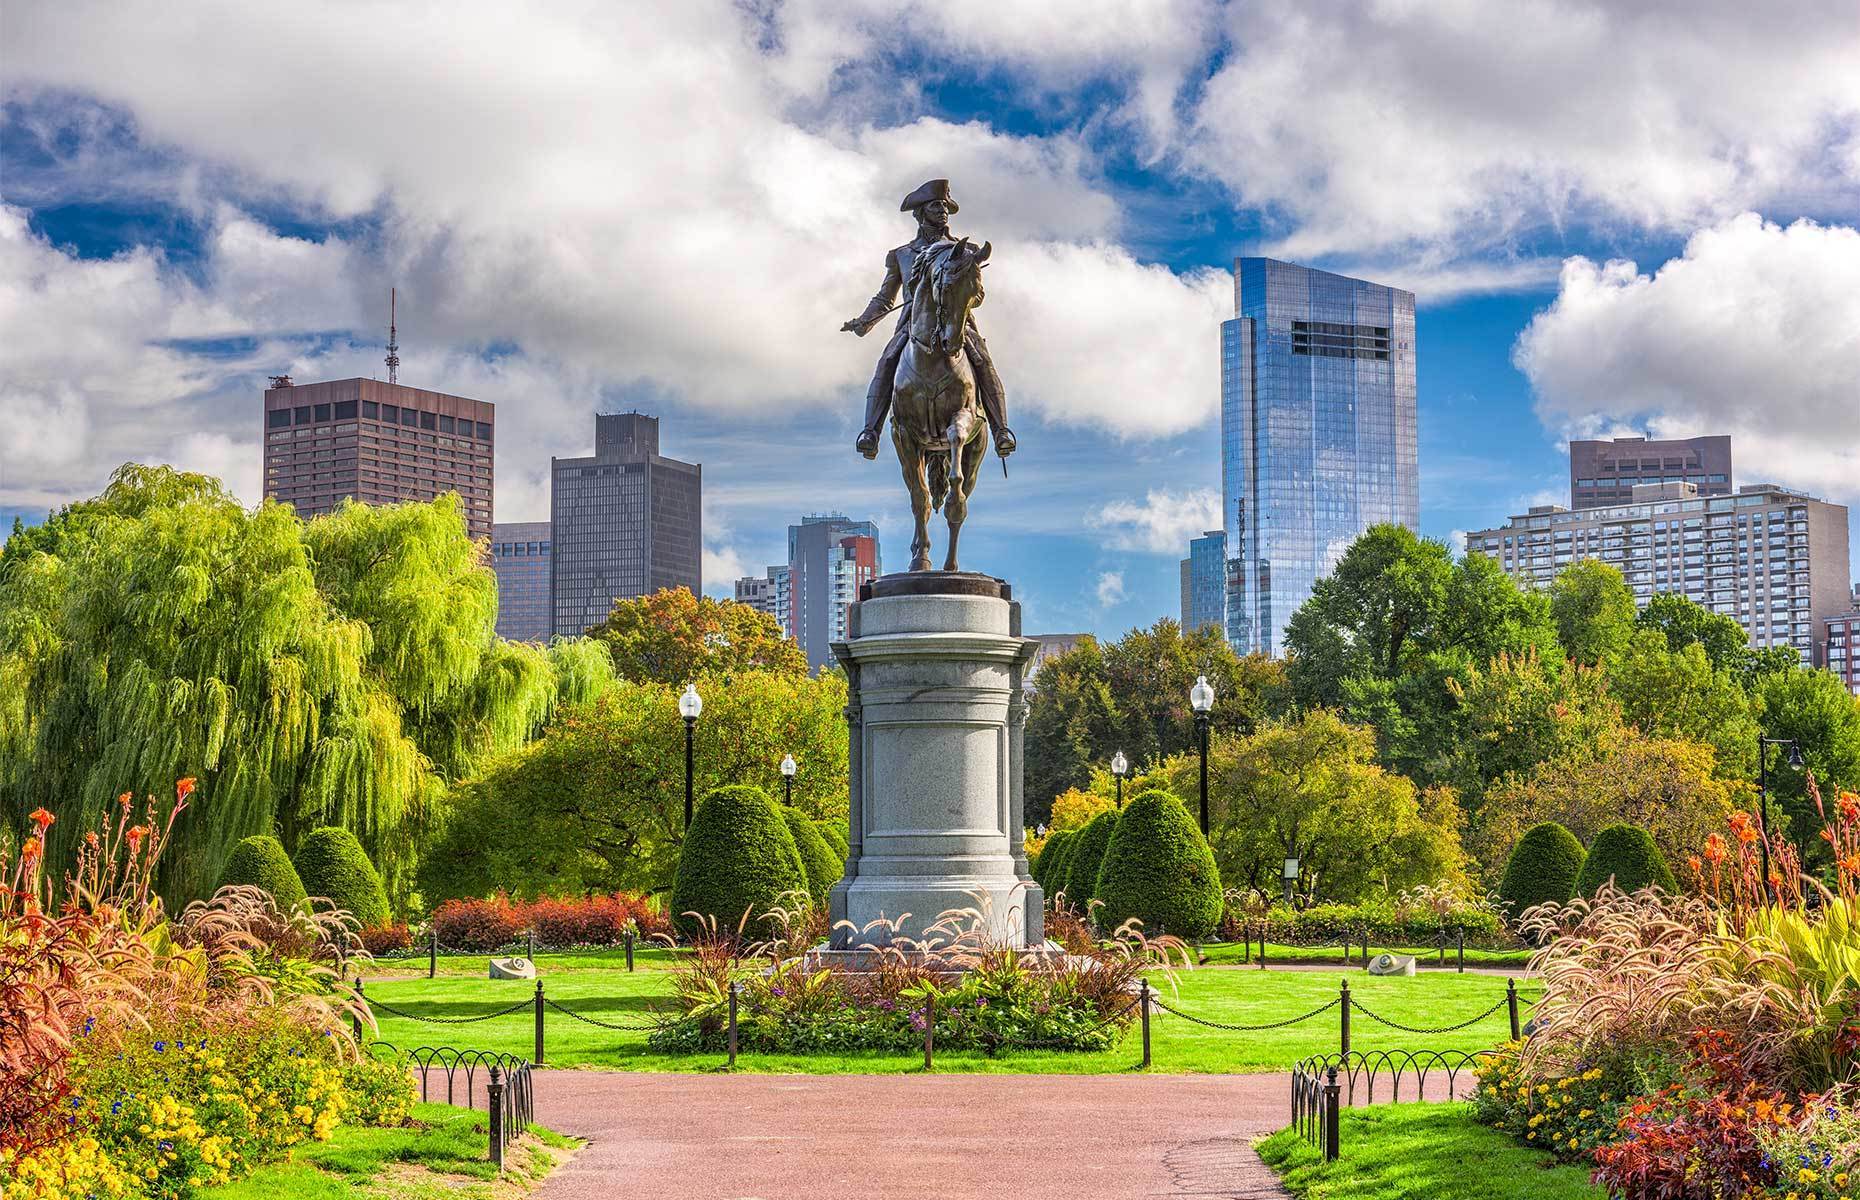 <p class="p1"><span>Be sure to pay a visit to the statue of George Washington as you stroll through Boston’s Public Garden in the city’s downtown. George Washington was the <a href="https://www.biography.com/us-president/george-washington" rel="noreferrer noopener"><span>first president of the United States</span></a> (from 1789 to 1797) and the garden is America’s <a href="https://www.boston.gov/parks/public-garden" rel="noreferrer noopener"><span>first botanical garden</span></a> (inaugurated in 1837).</span></p>